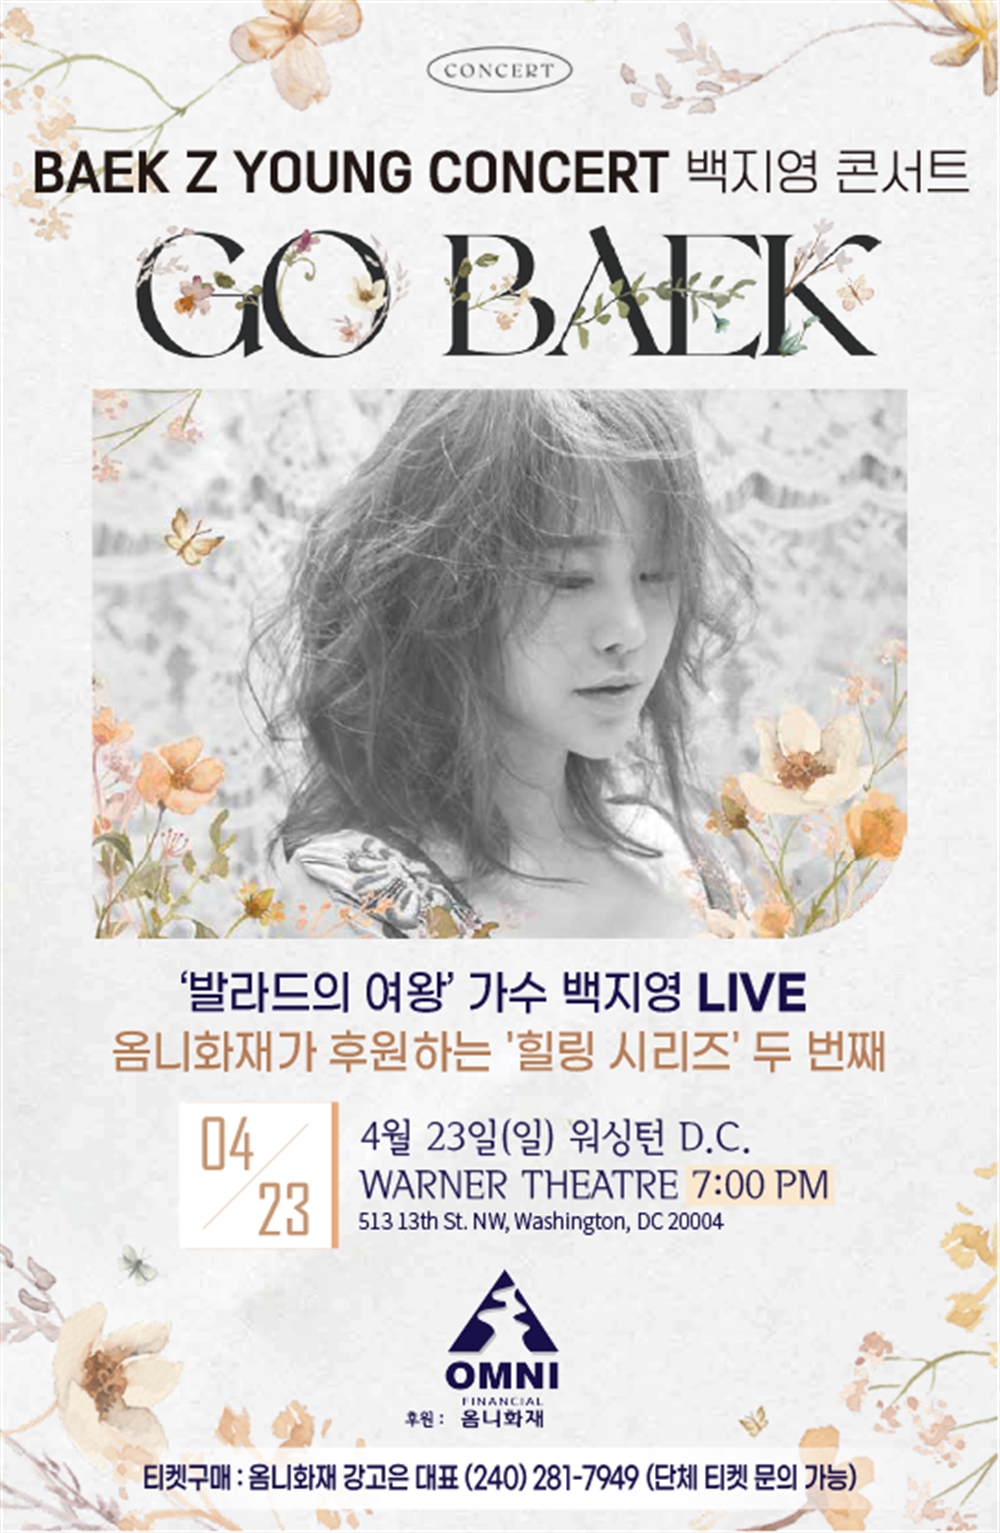 Omni's Healing Project 2, Back Z Young Concert